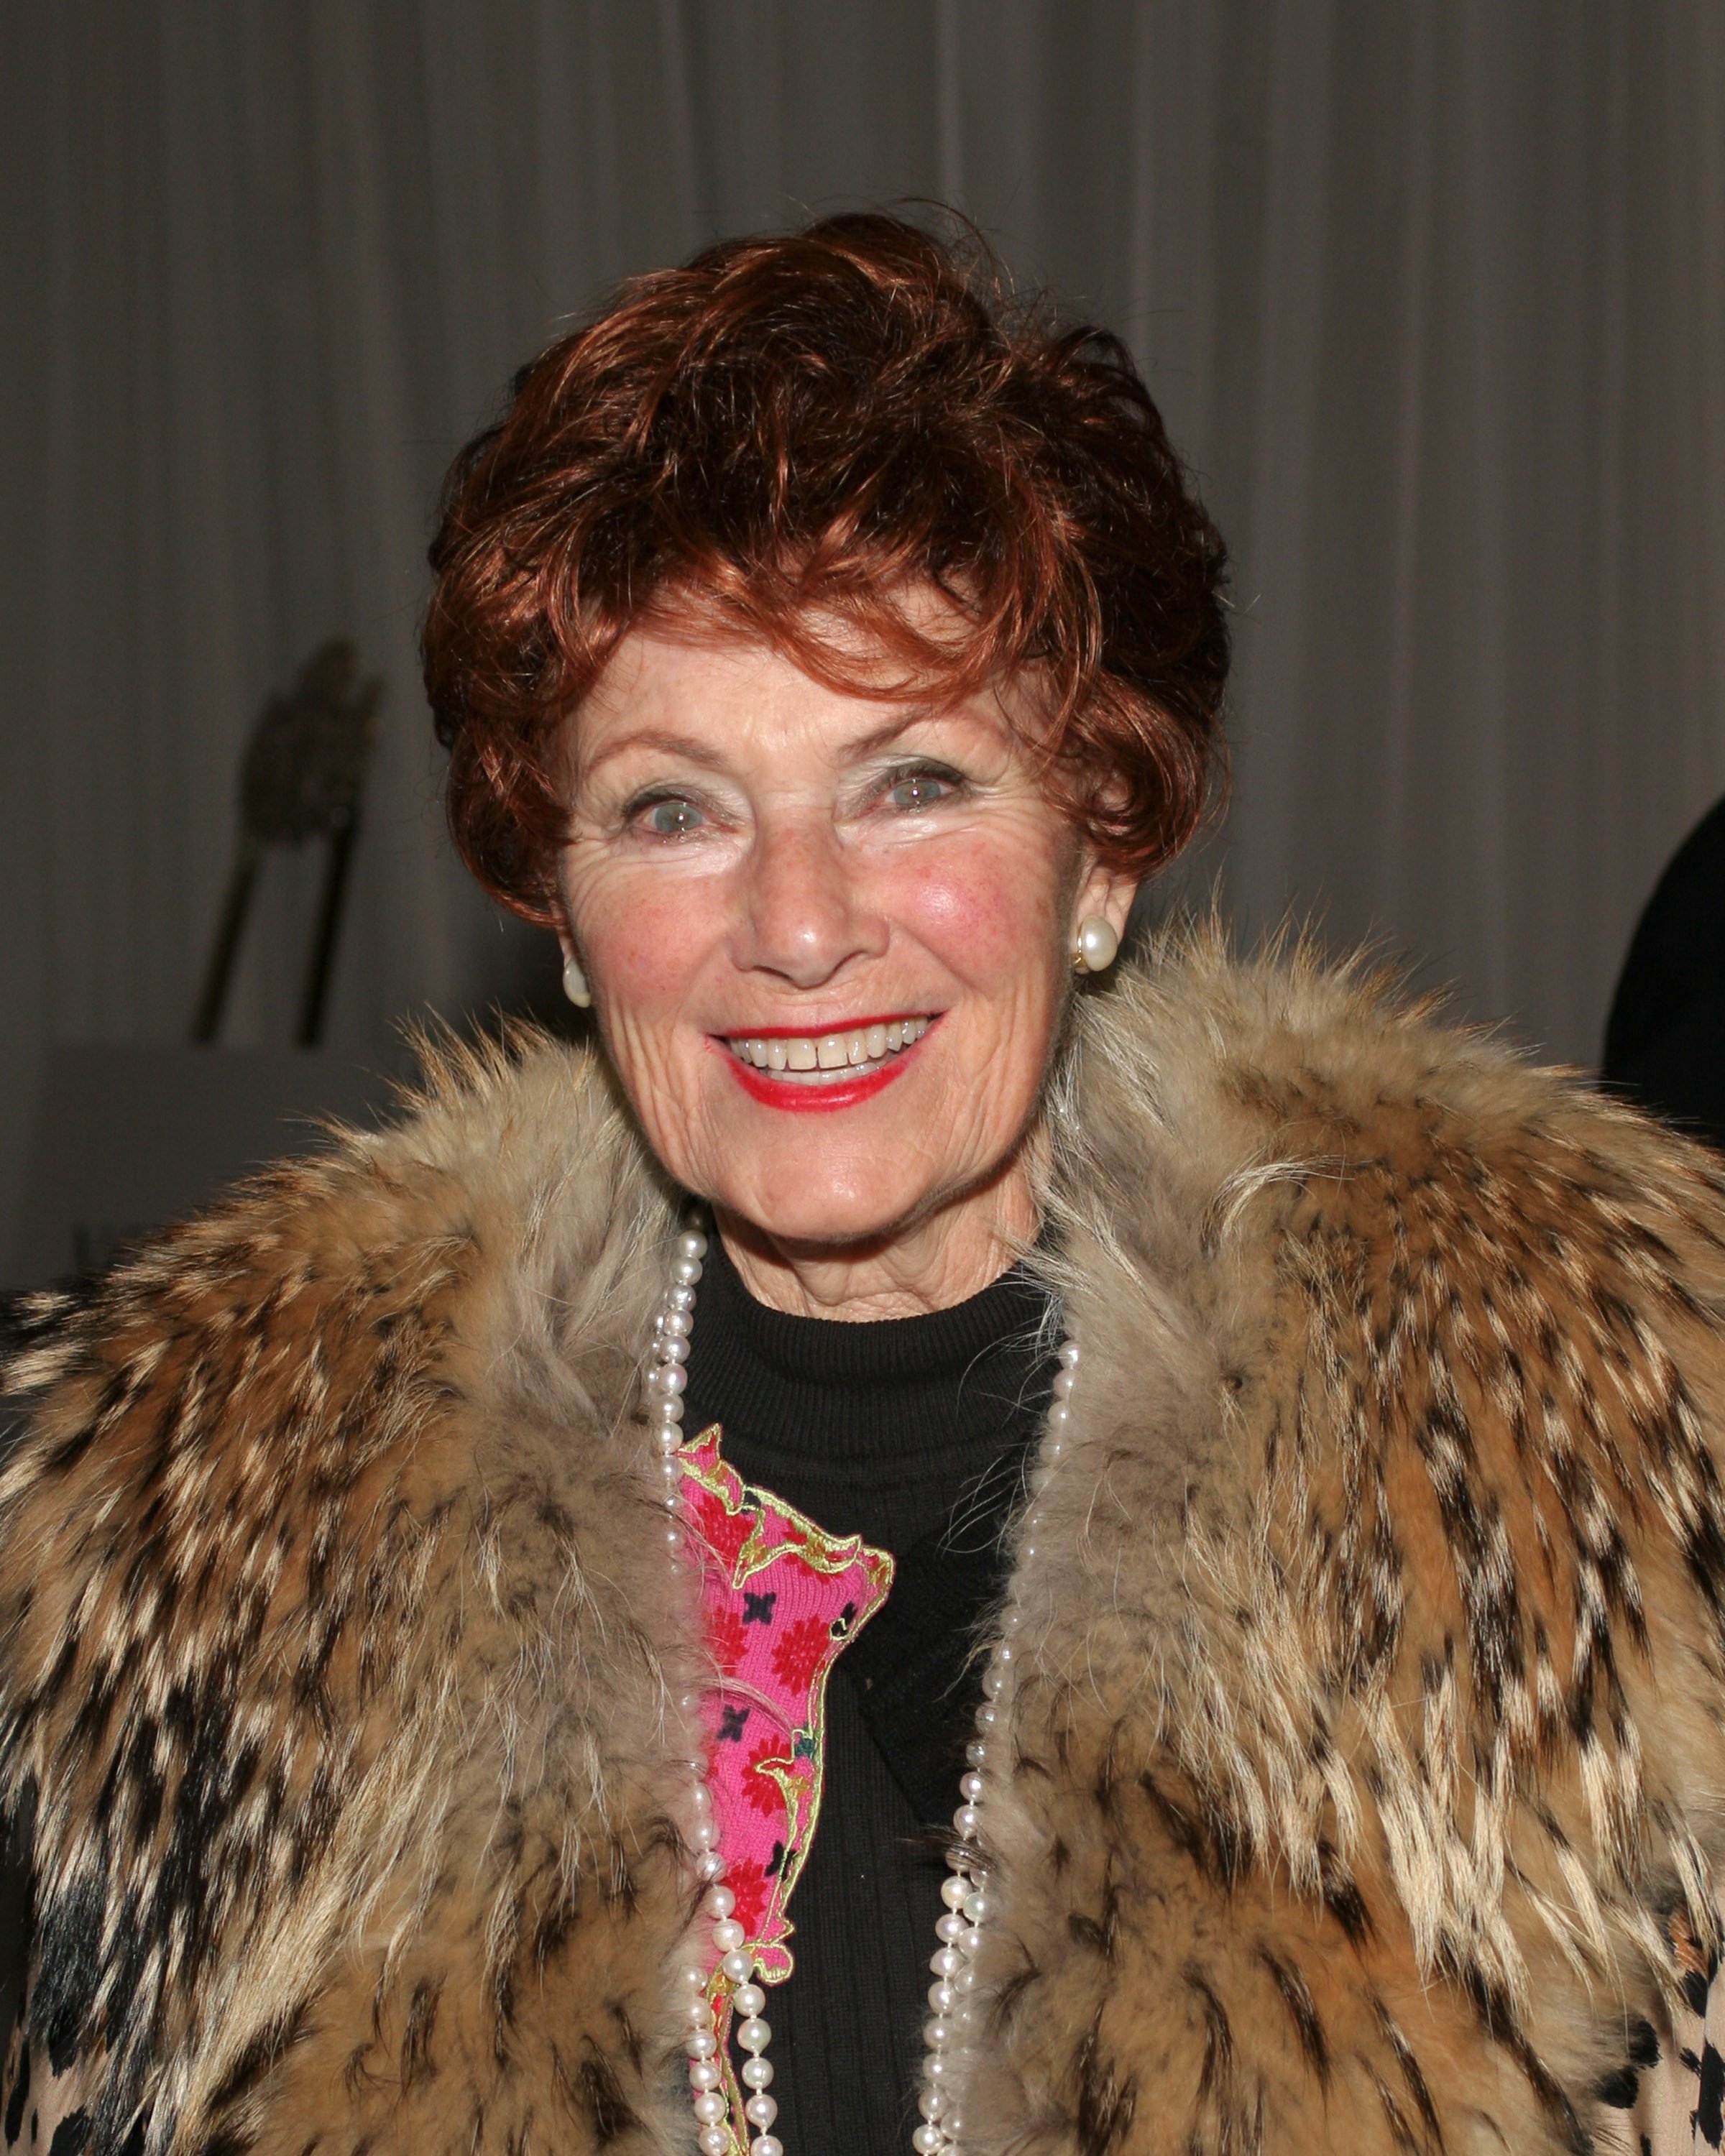 Actress Marion Ross at the 6th Annual Television Awards on December 1, 2004 in Beverly Hills, California. | Source: Getty Images